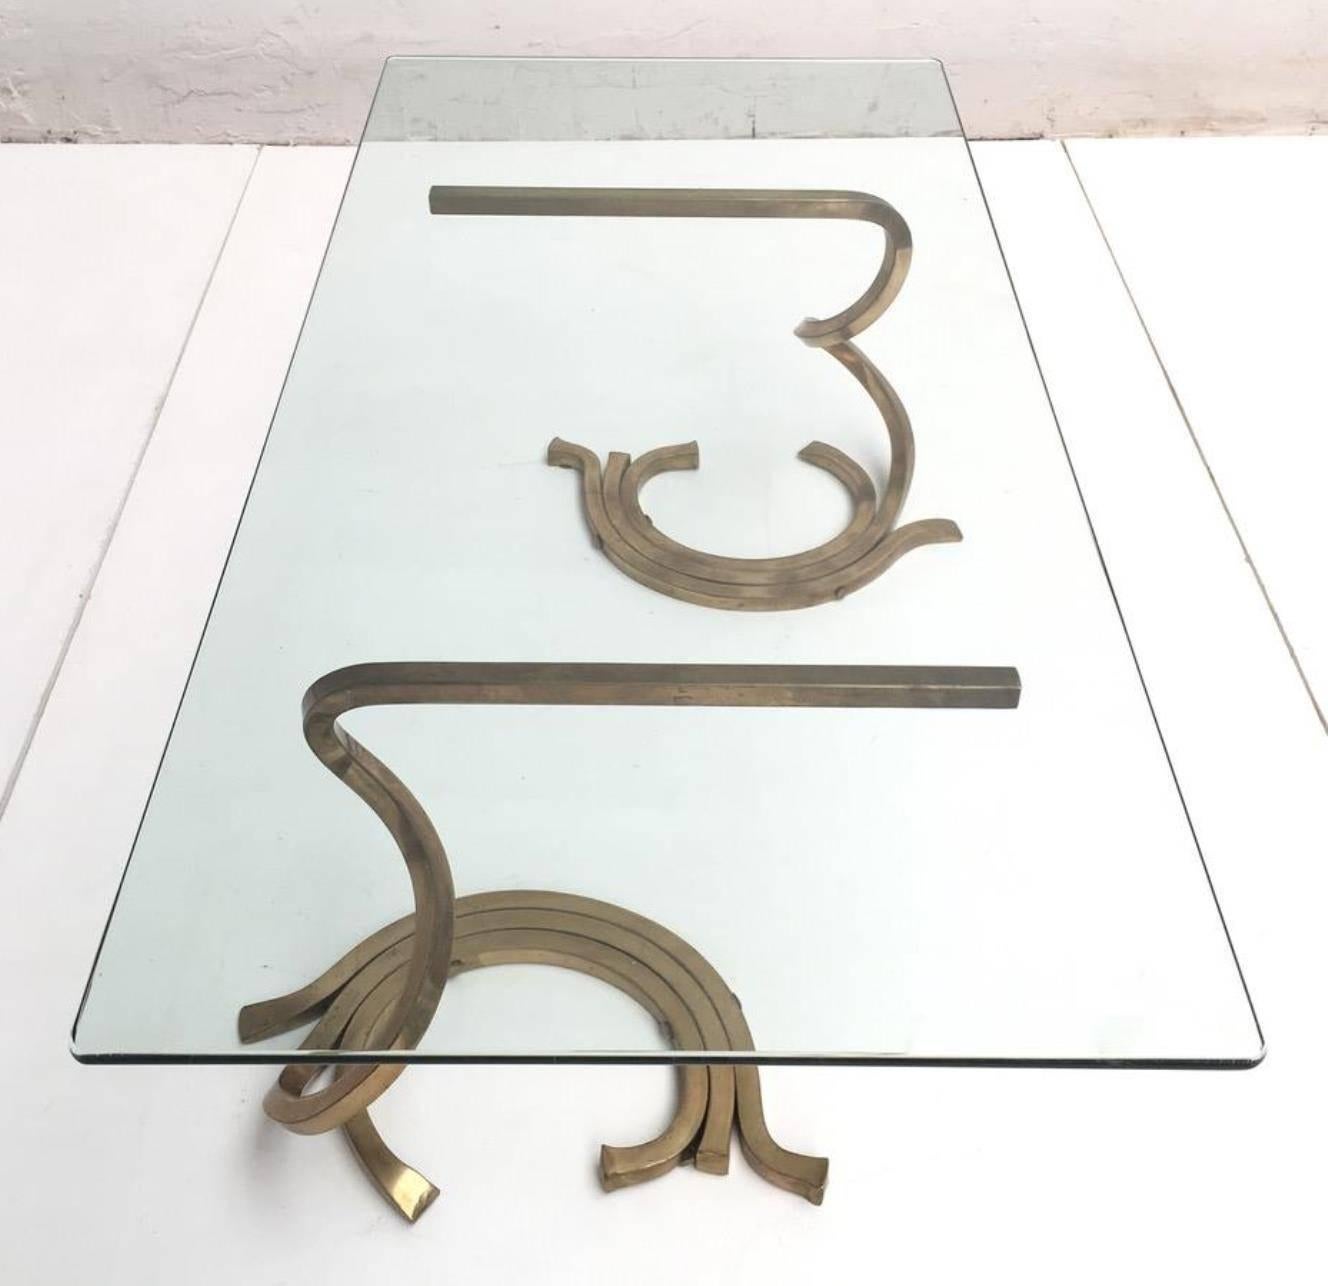 Hand-Crafted Stunning Sculptural Serpentine Form Coffee Table, Solid Brass Bar, Italy, 1970